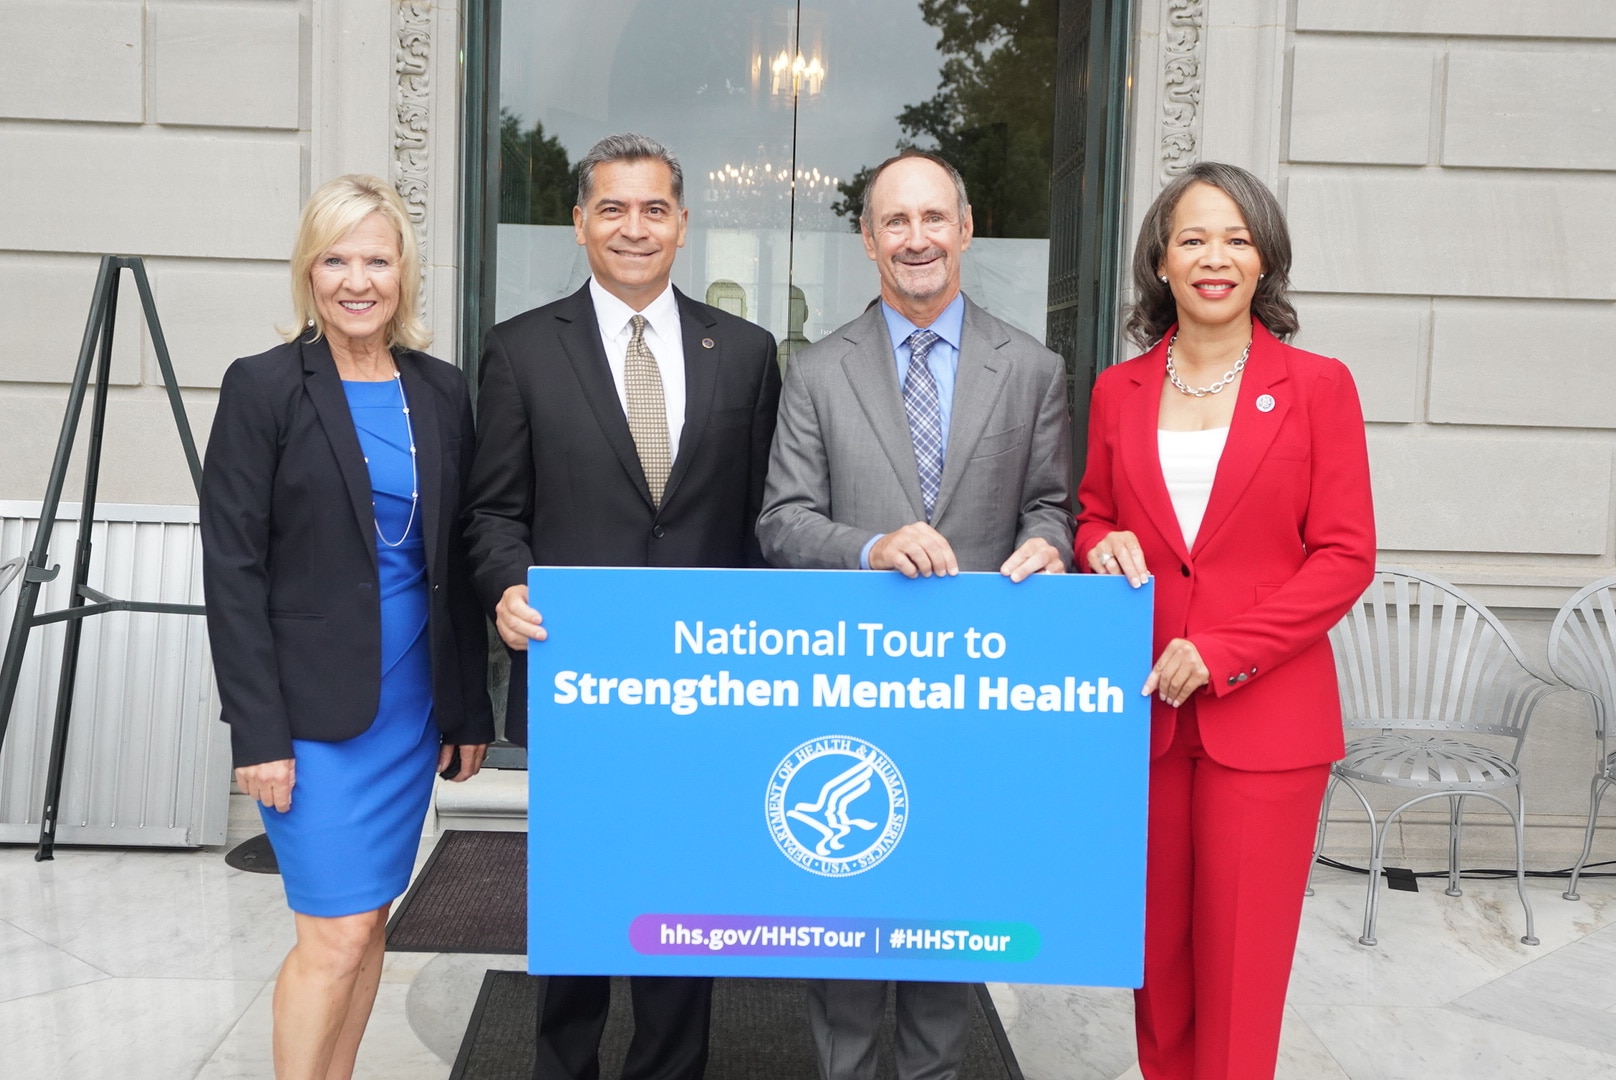 Secretary Becerra is standing behind a light blue Mental Health tour sign wearing a dark suit. To the right of him is a male wearing a light grey suit with a blue shirt, to the right of him is a lady wearing a red pant suit. To the left of Secretary Becerra is a lady wearing a blue dress with a black blazer.